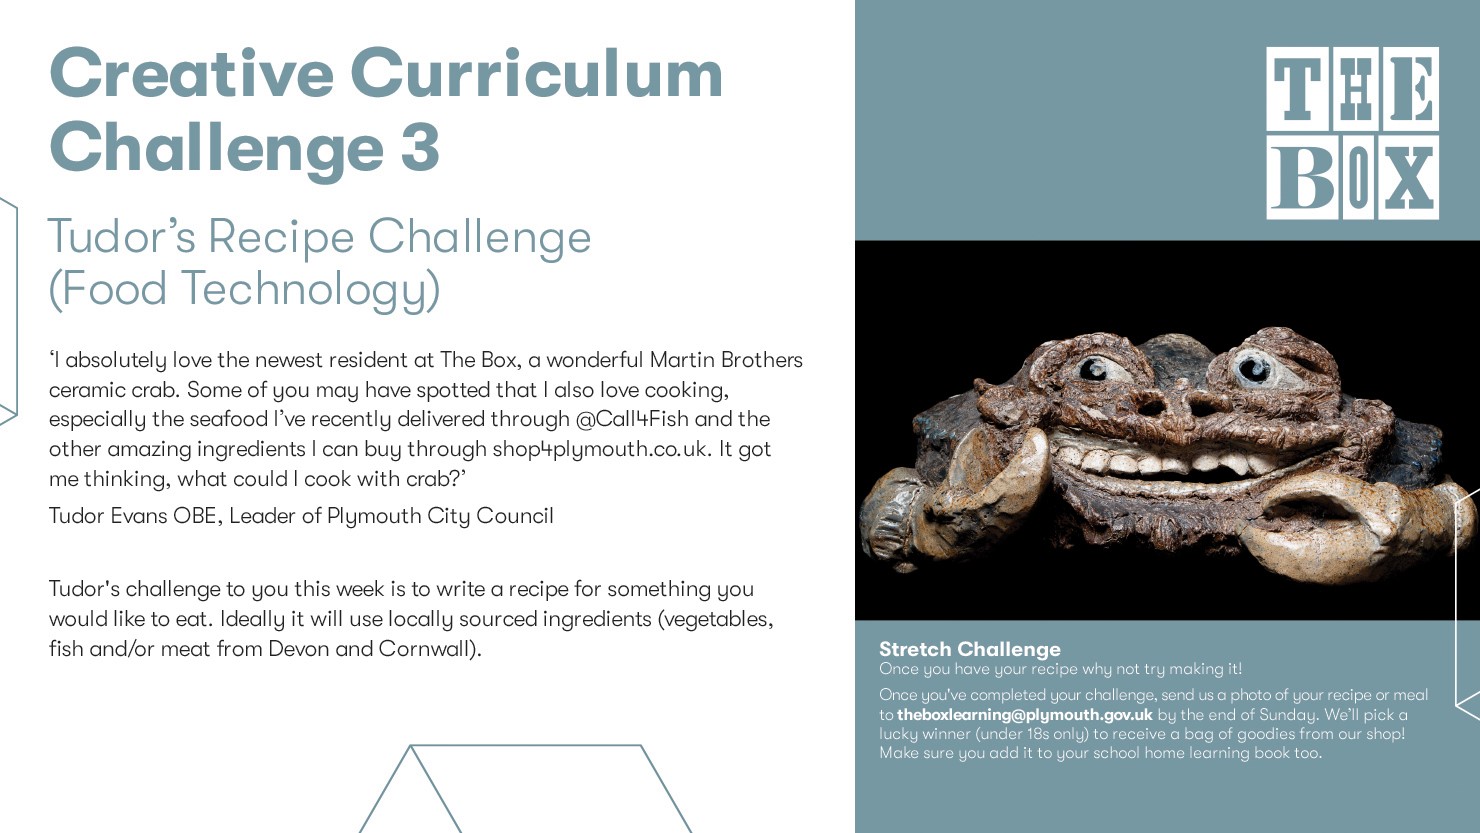 Graphic for The Box's Creative Curriculum Challenge 3